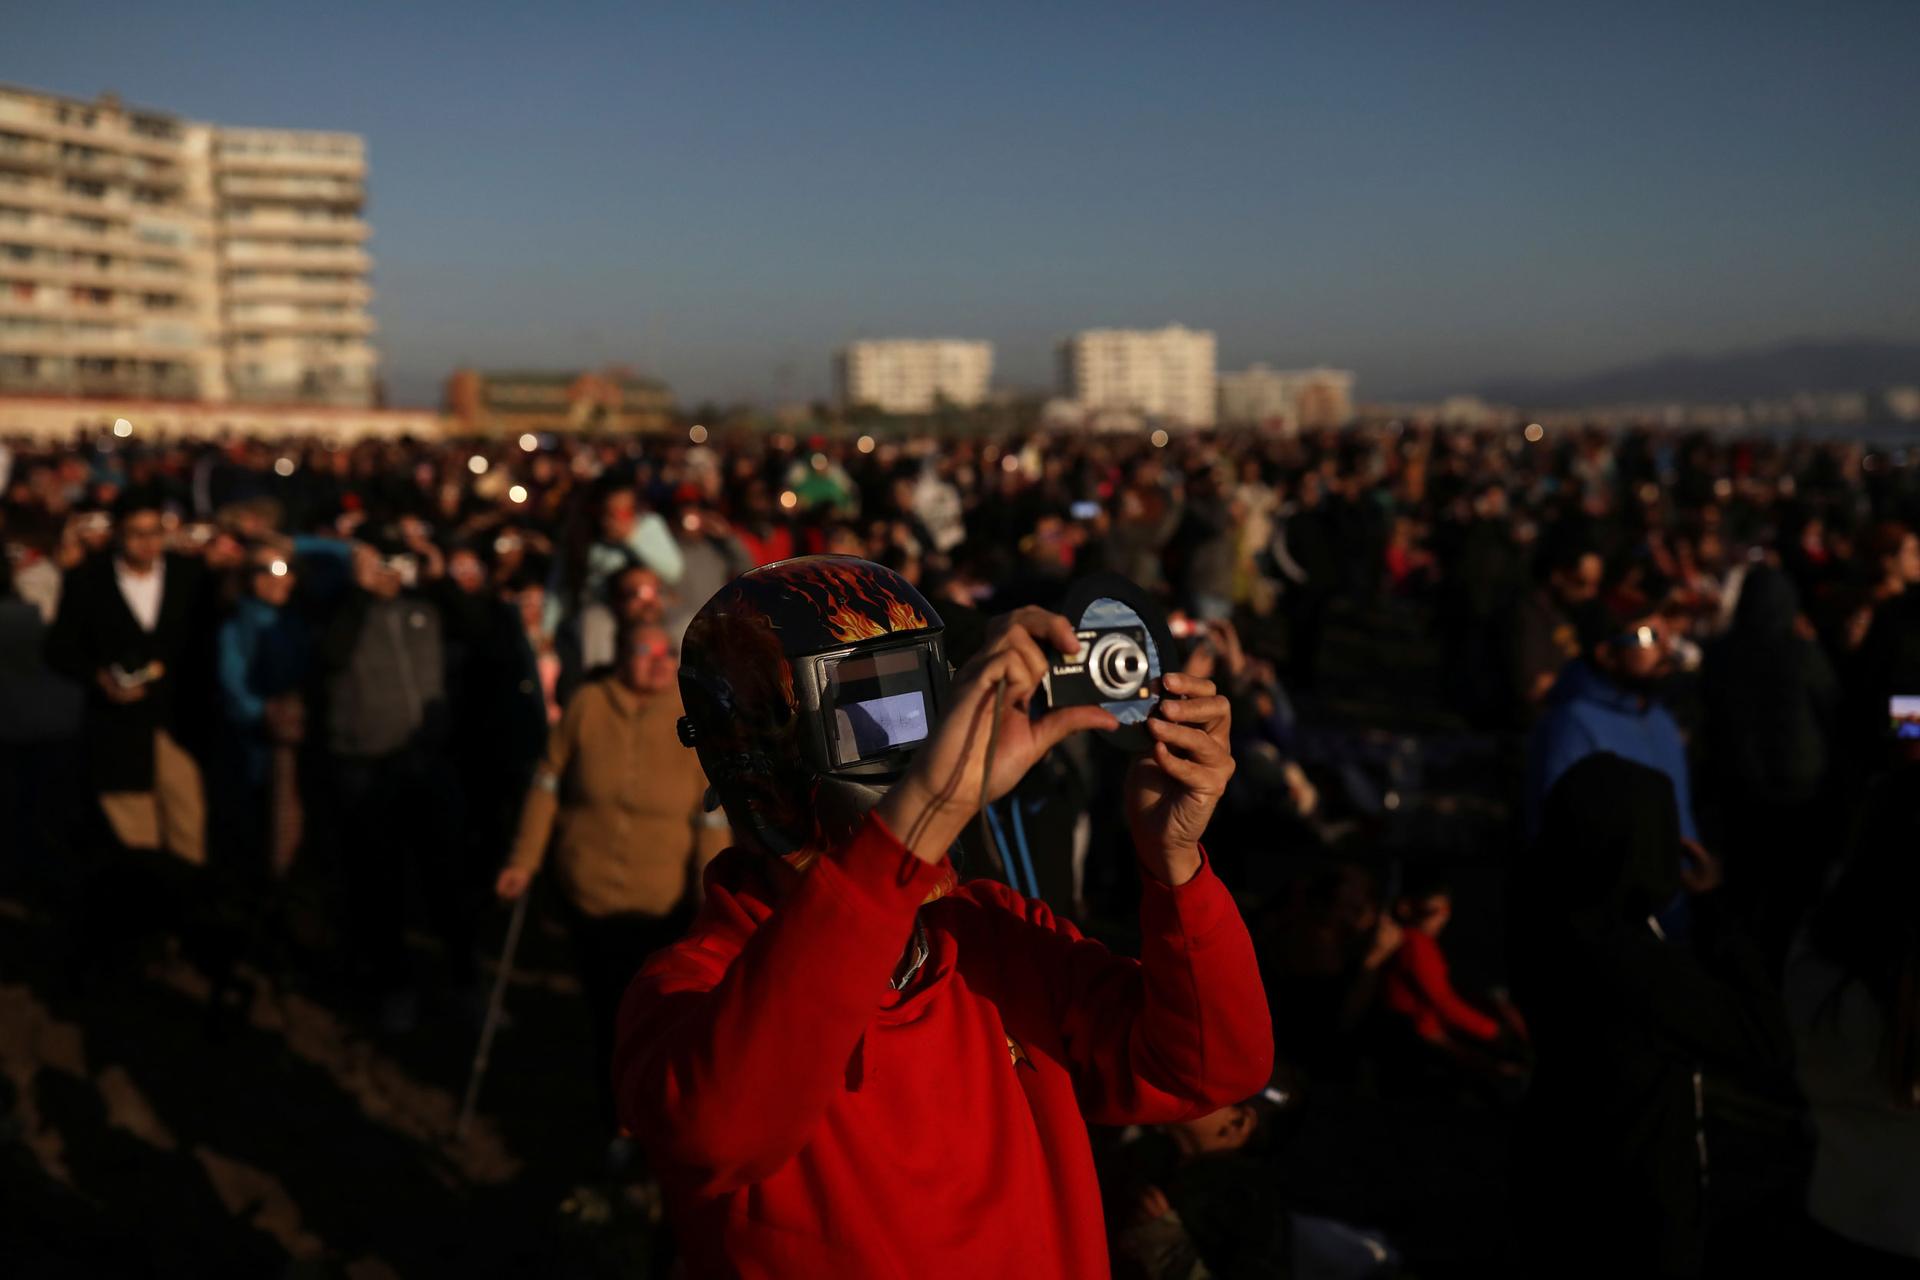 A man wearing a red sweatshirt is shown with a mask with a filter to view a the solar eclipse.